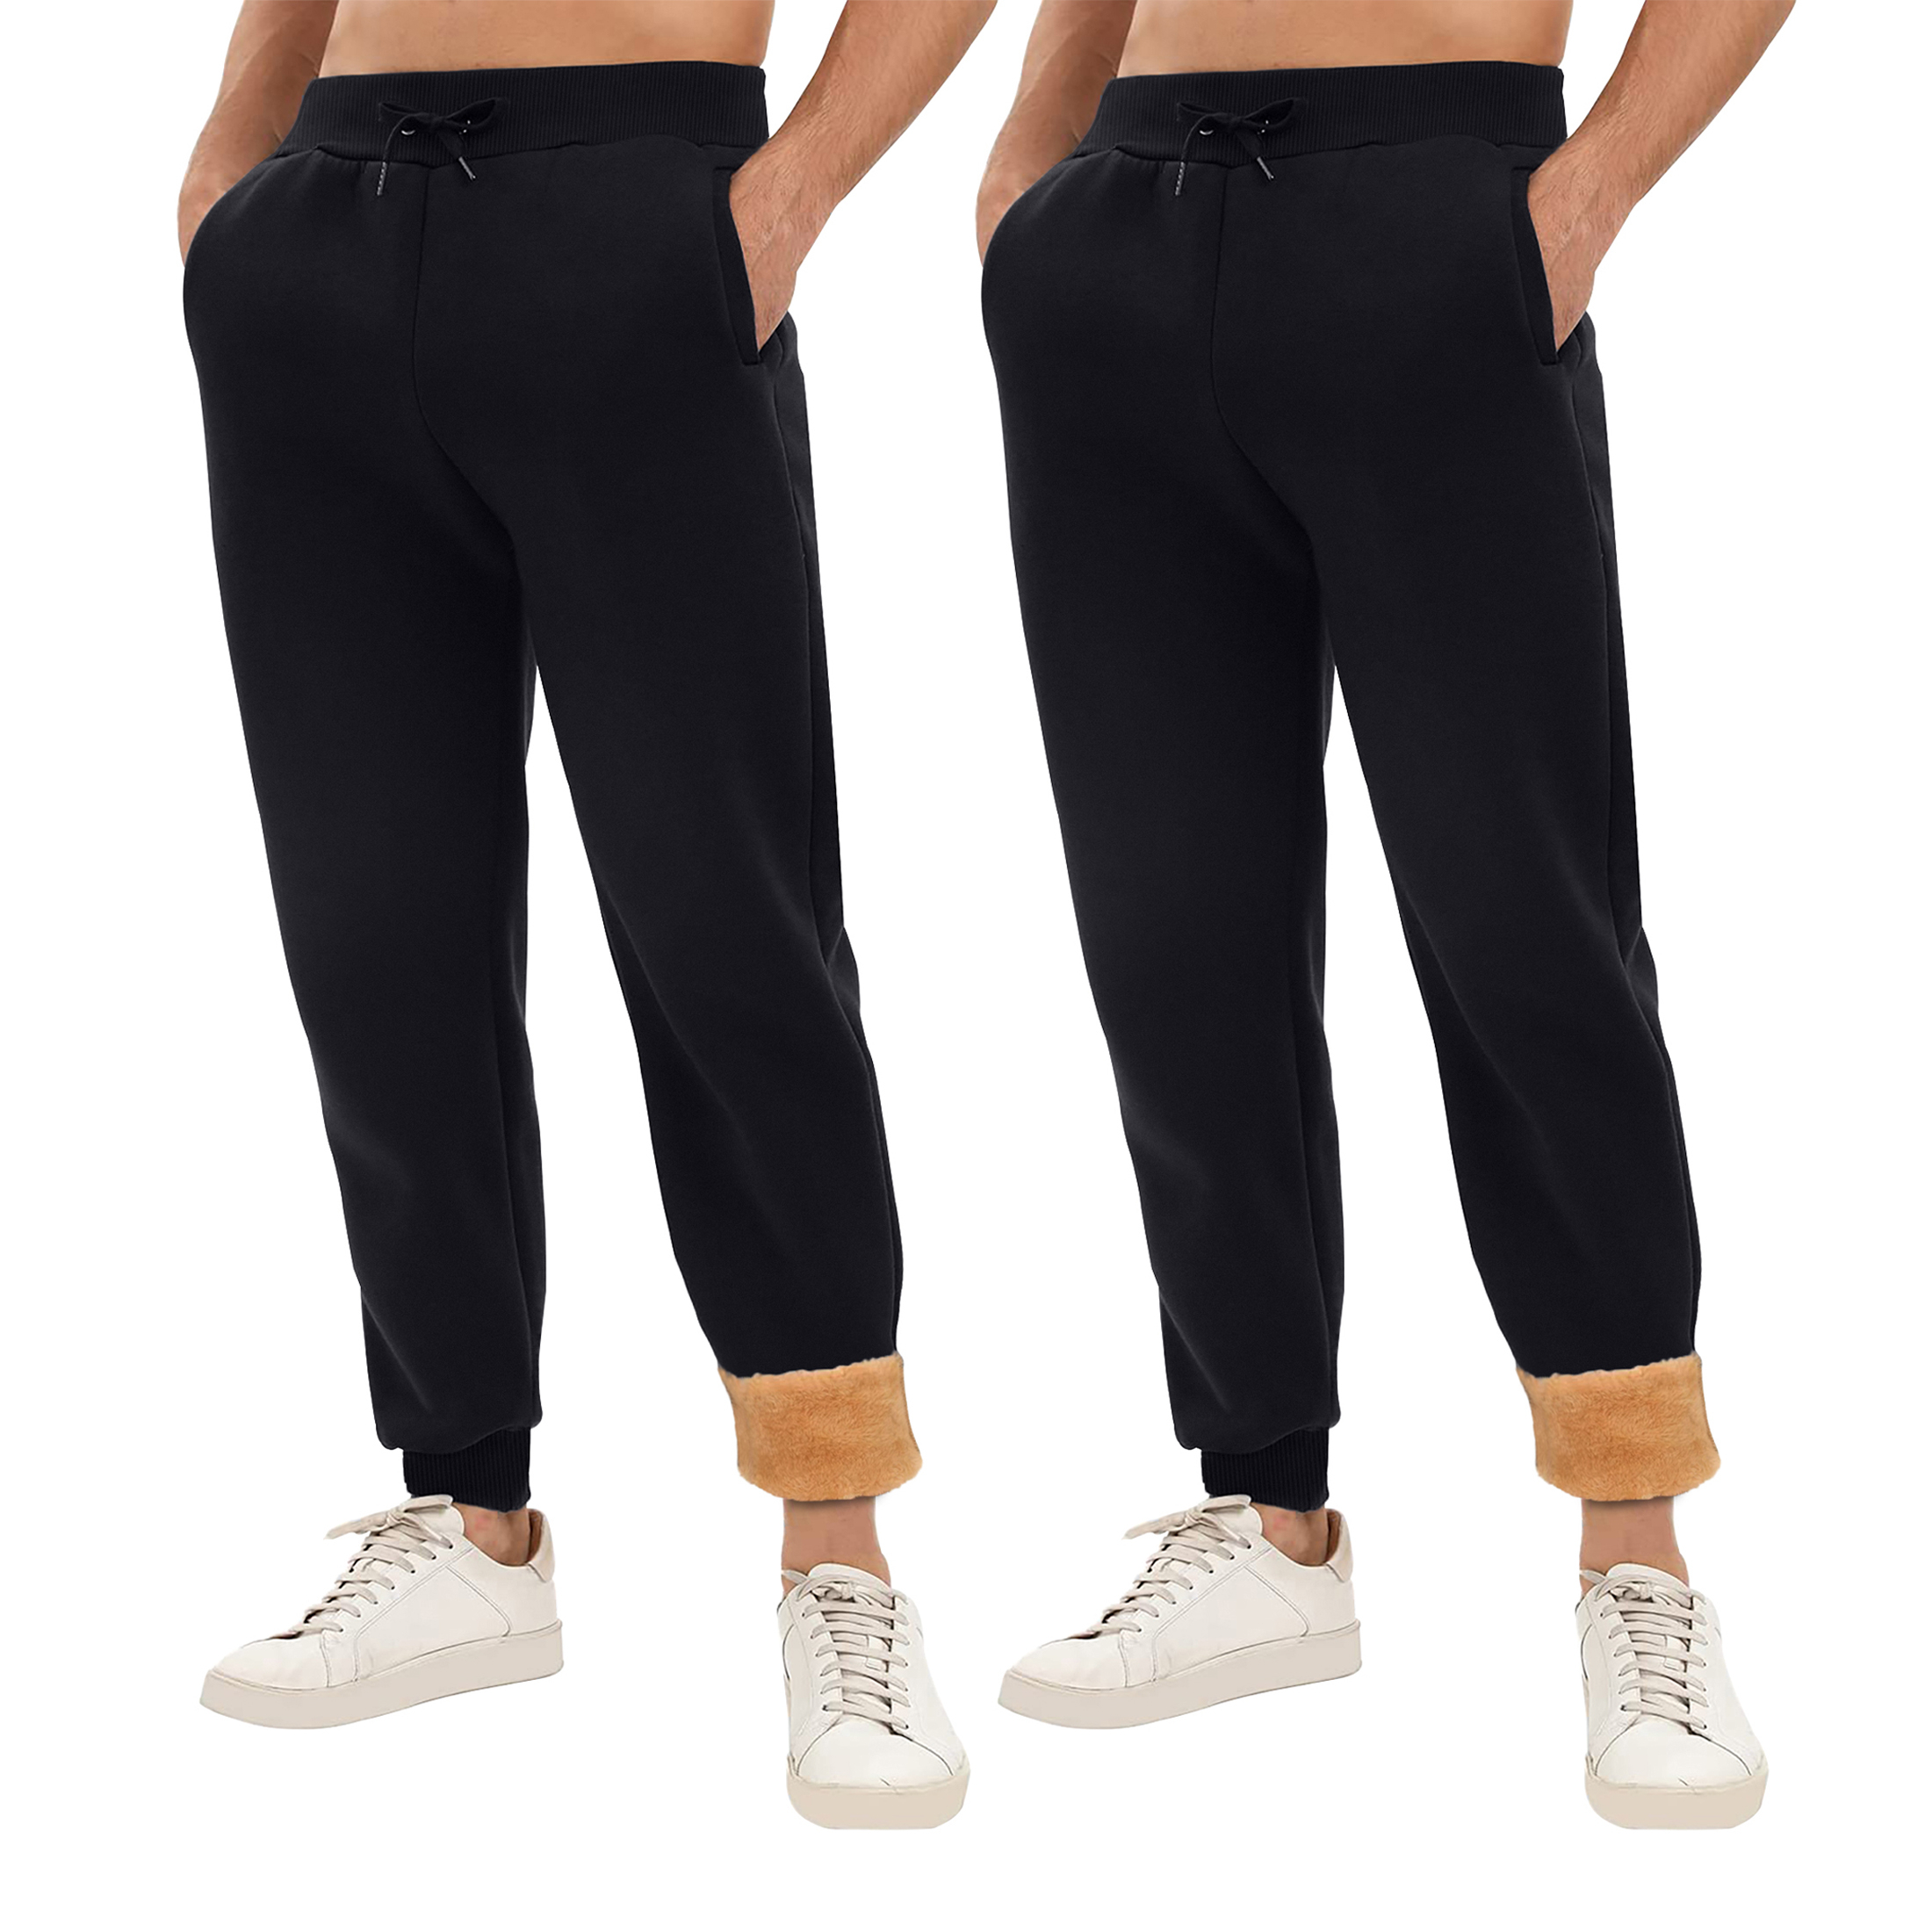 2-Pack: Men's Winter Warm Thick Sherpa Lined Jogger Track Pants With Pockets - Black, Medium